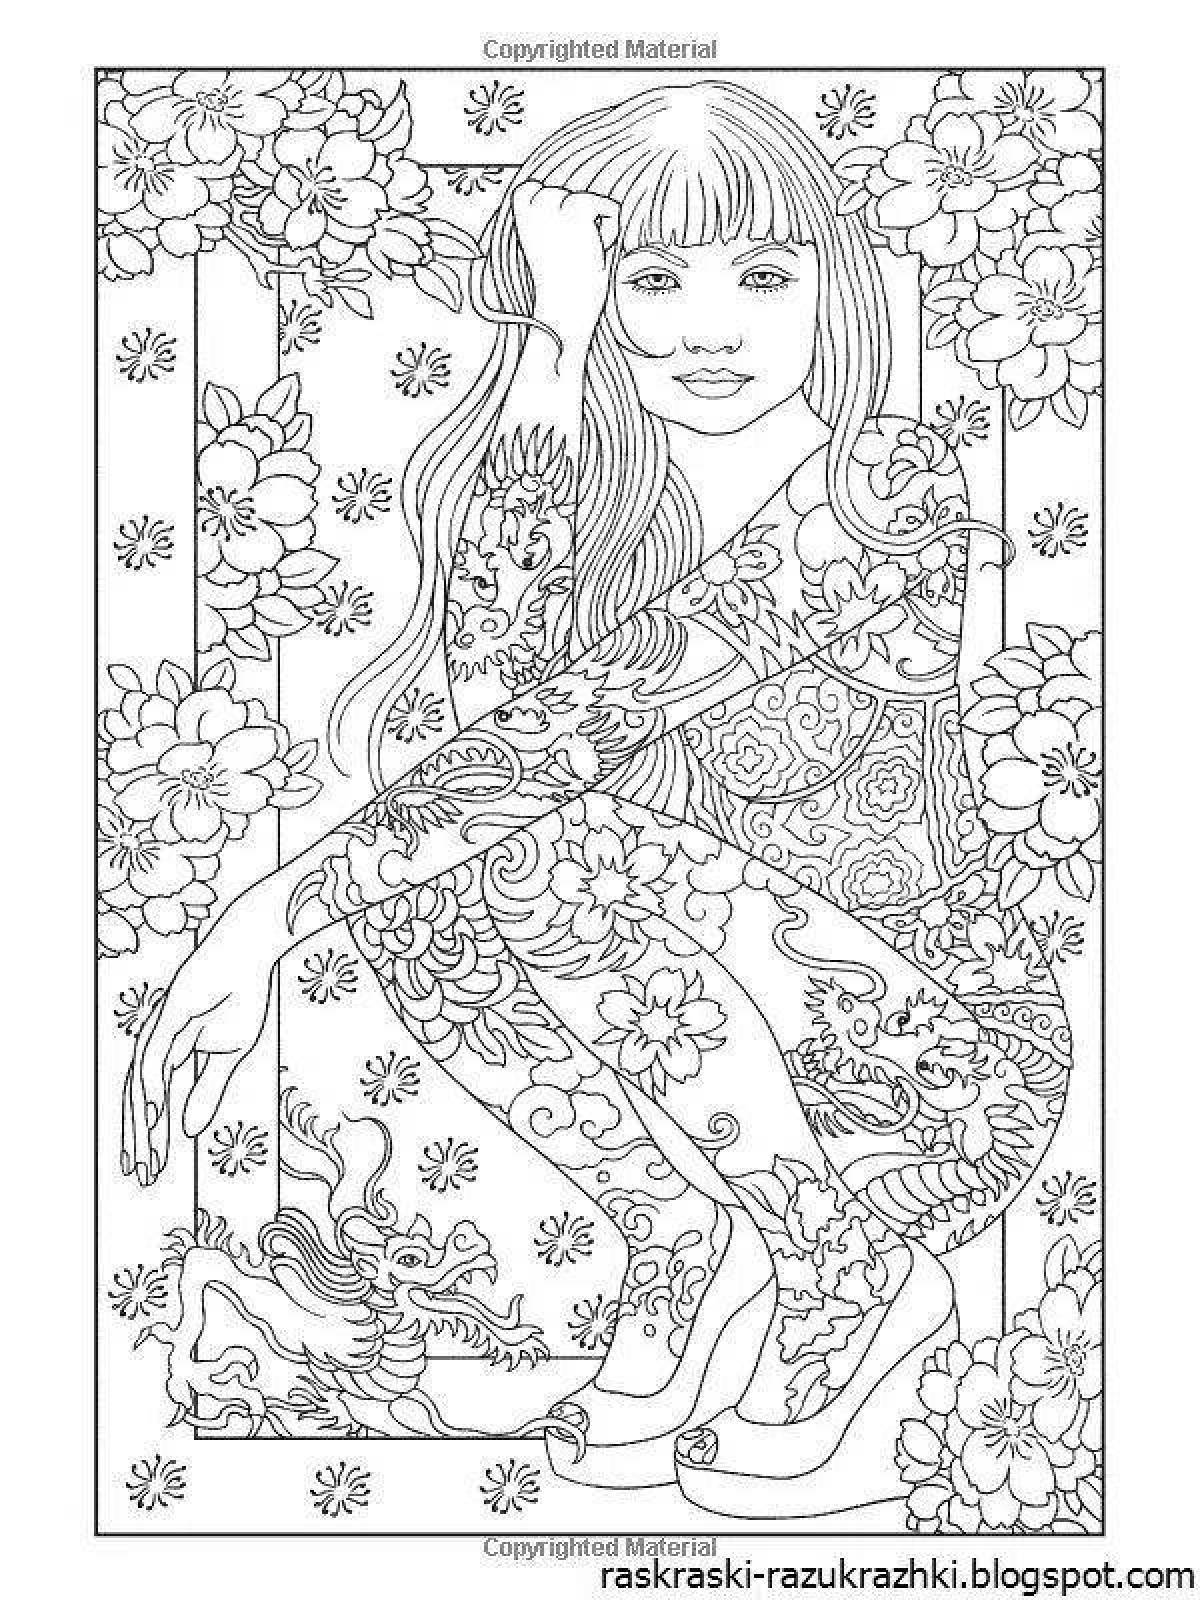 Cute coloring book for girls 9-10 years old